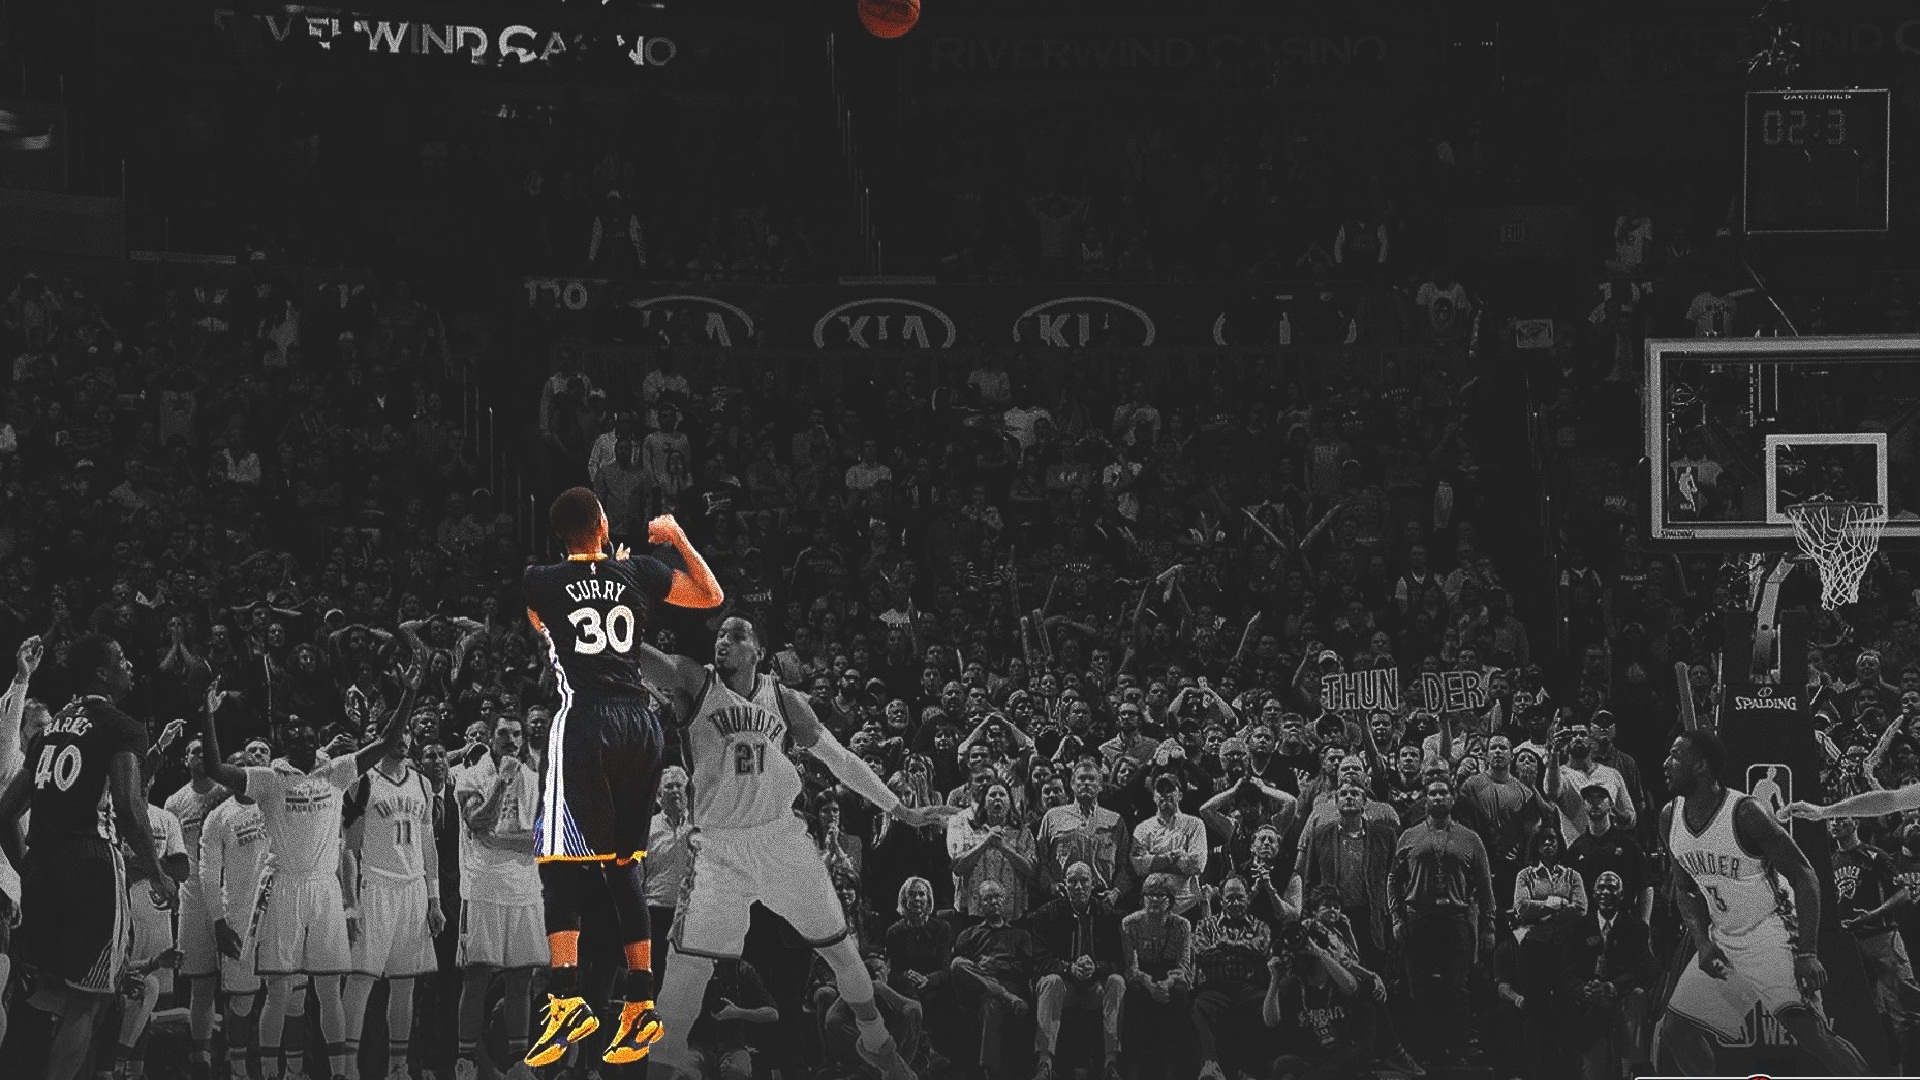 nba wallpaper hd for android,crowd,fan,sport venue,audience,basketball moves